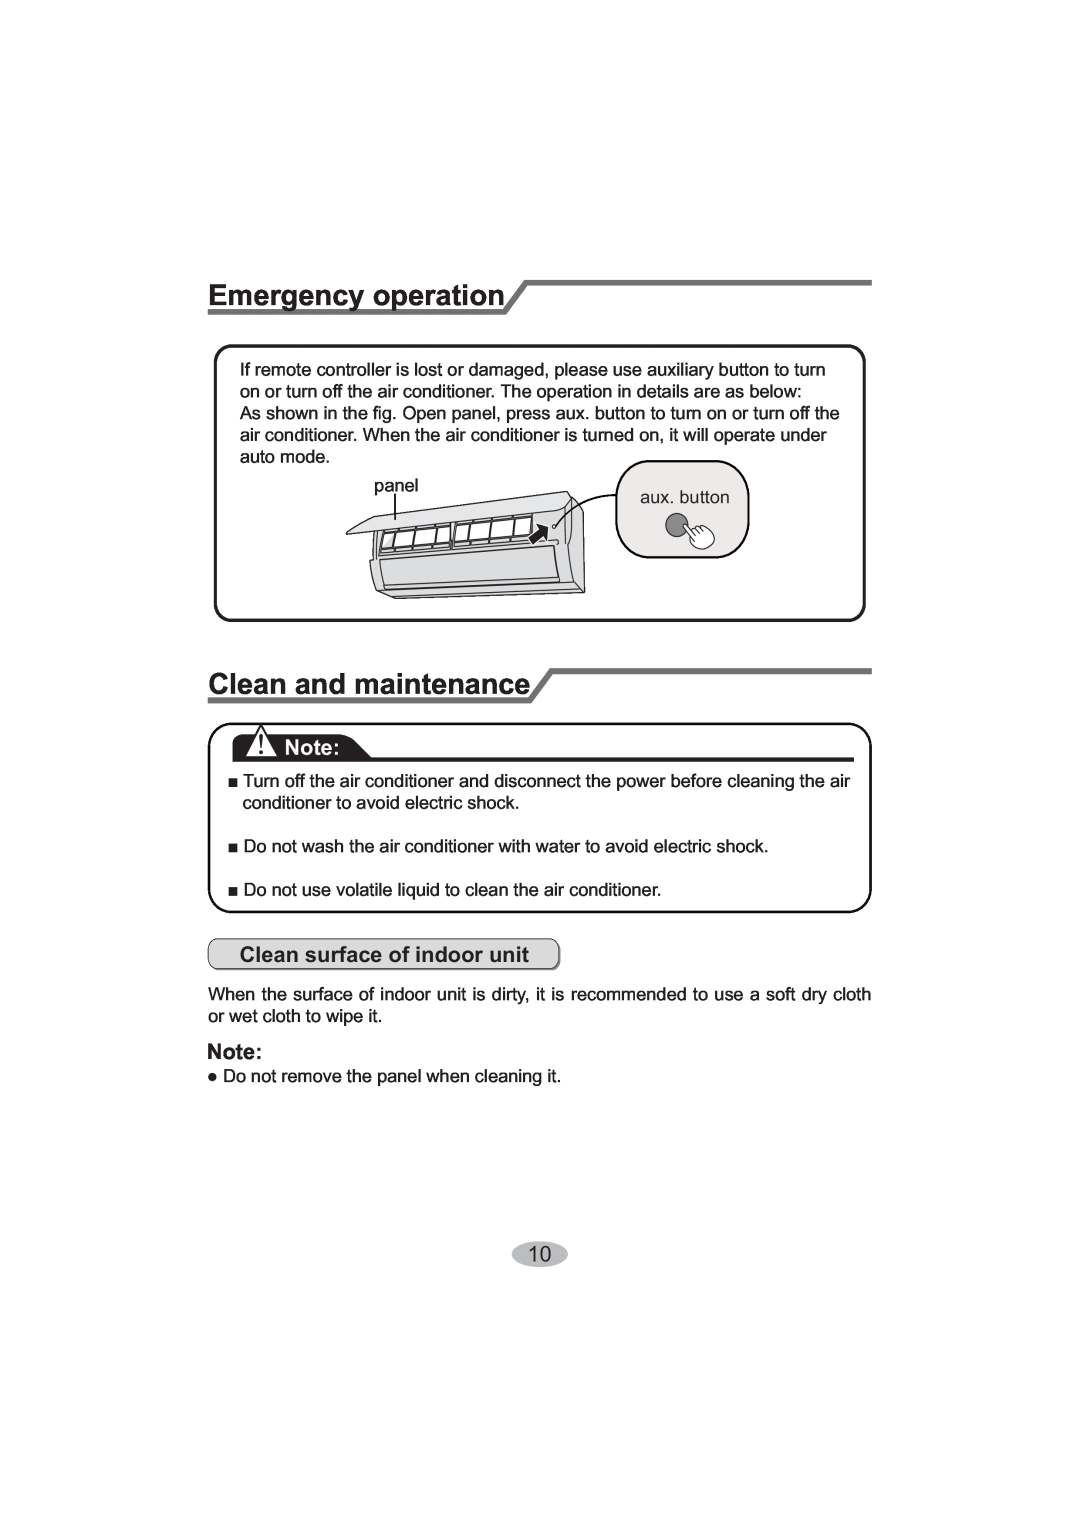 Beko BK 6300, BK 5200 user manual Emergency operation, Clean and maintenance, Clean surface of indoor unit 